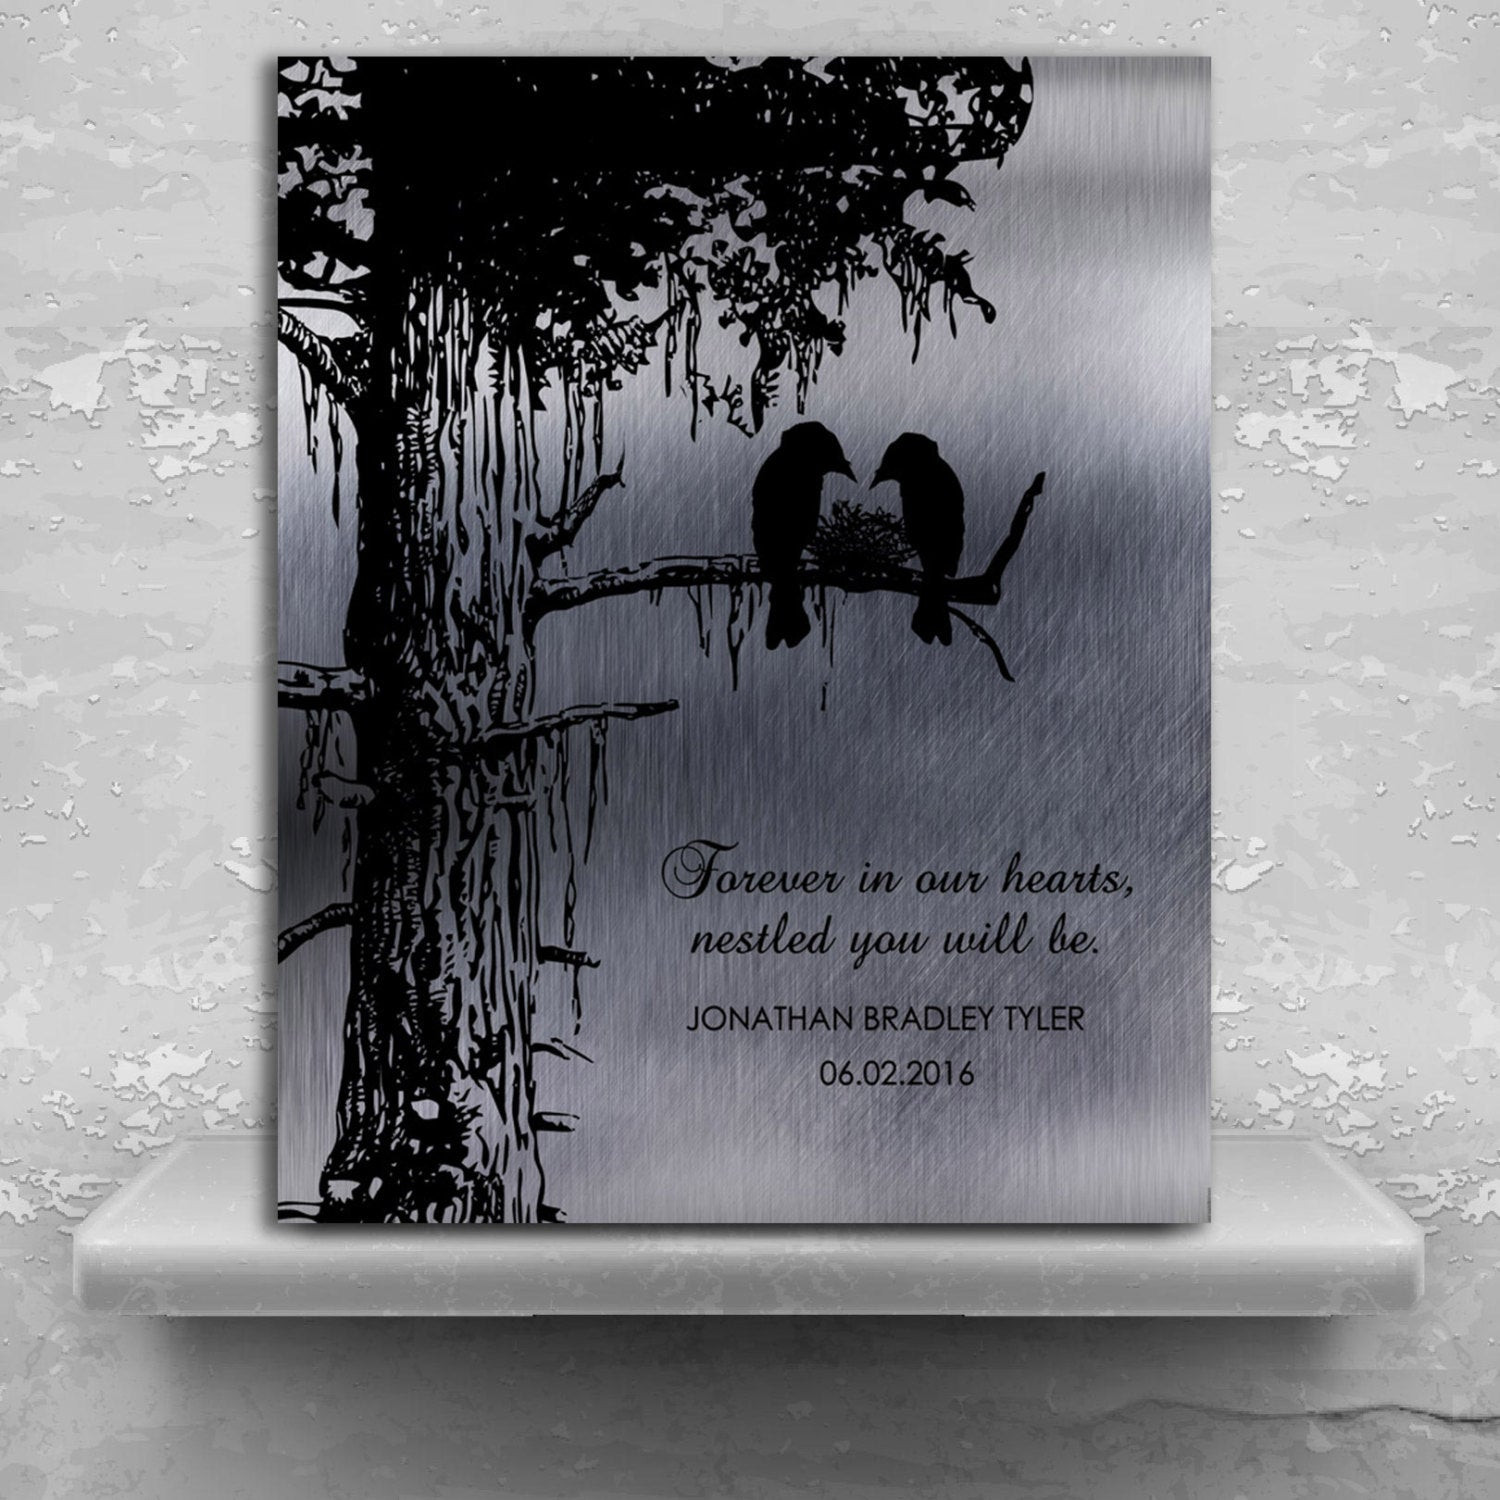 Gifts For Loss Of A Child
 Sympathy Gift of Condolence Memorial Plaque Loss of Baby Child